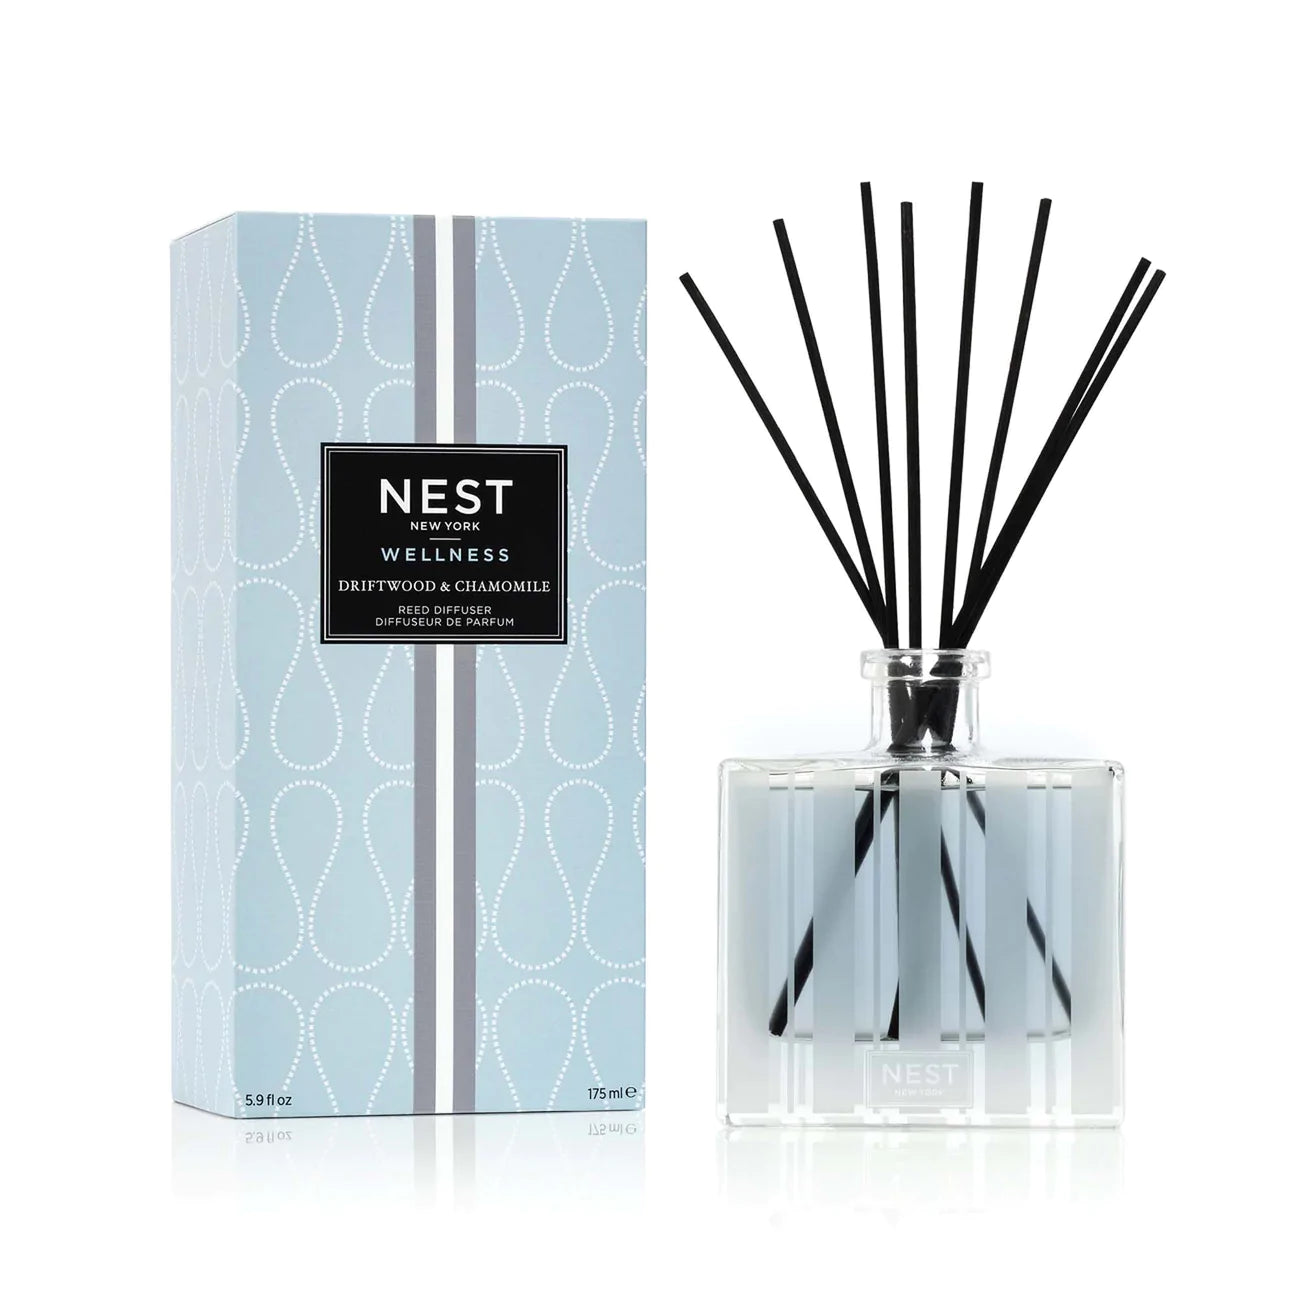 Reed Diffuser 5.9oz Driftwood & Chamomile